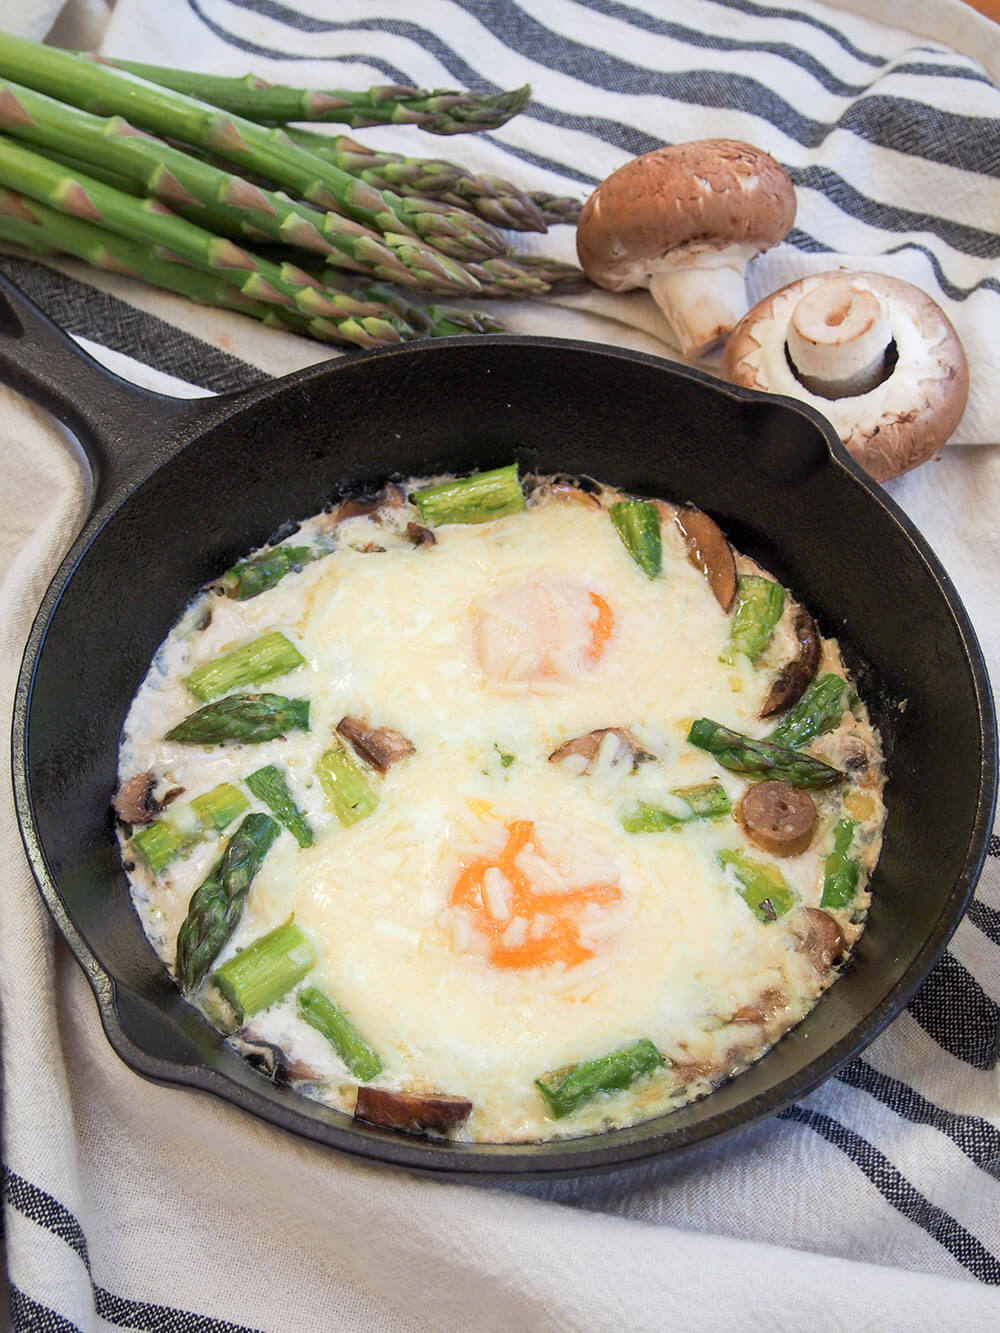 Baked eggs with mushrooms and asparagus